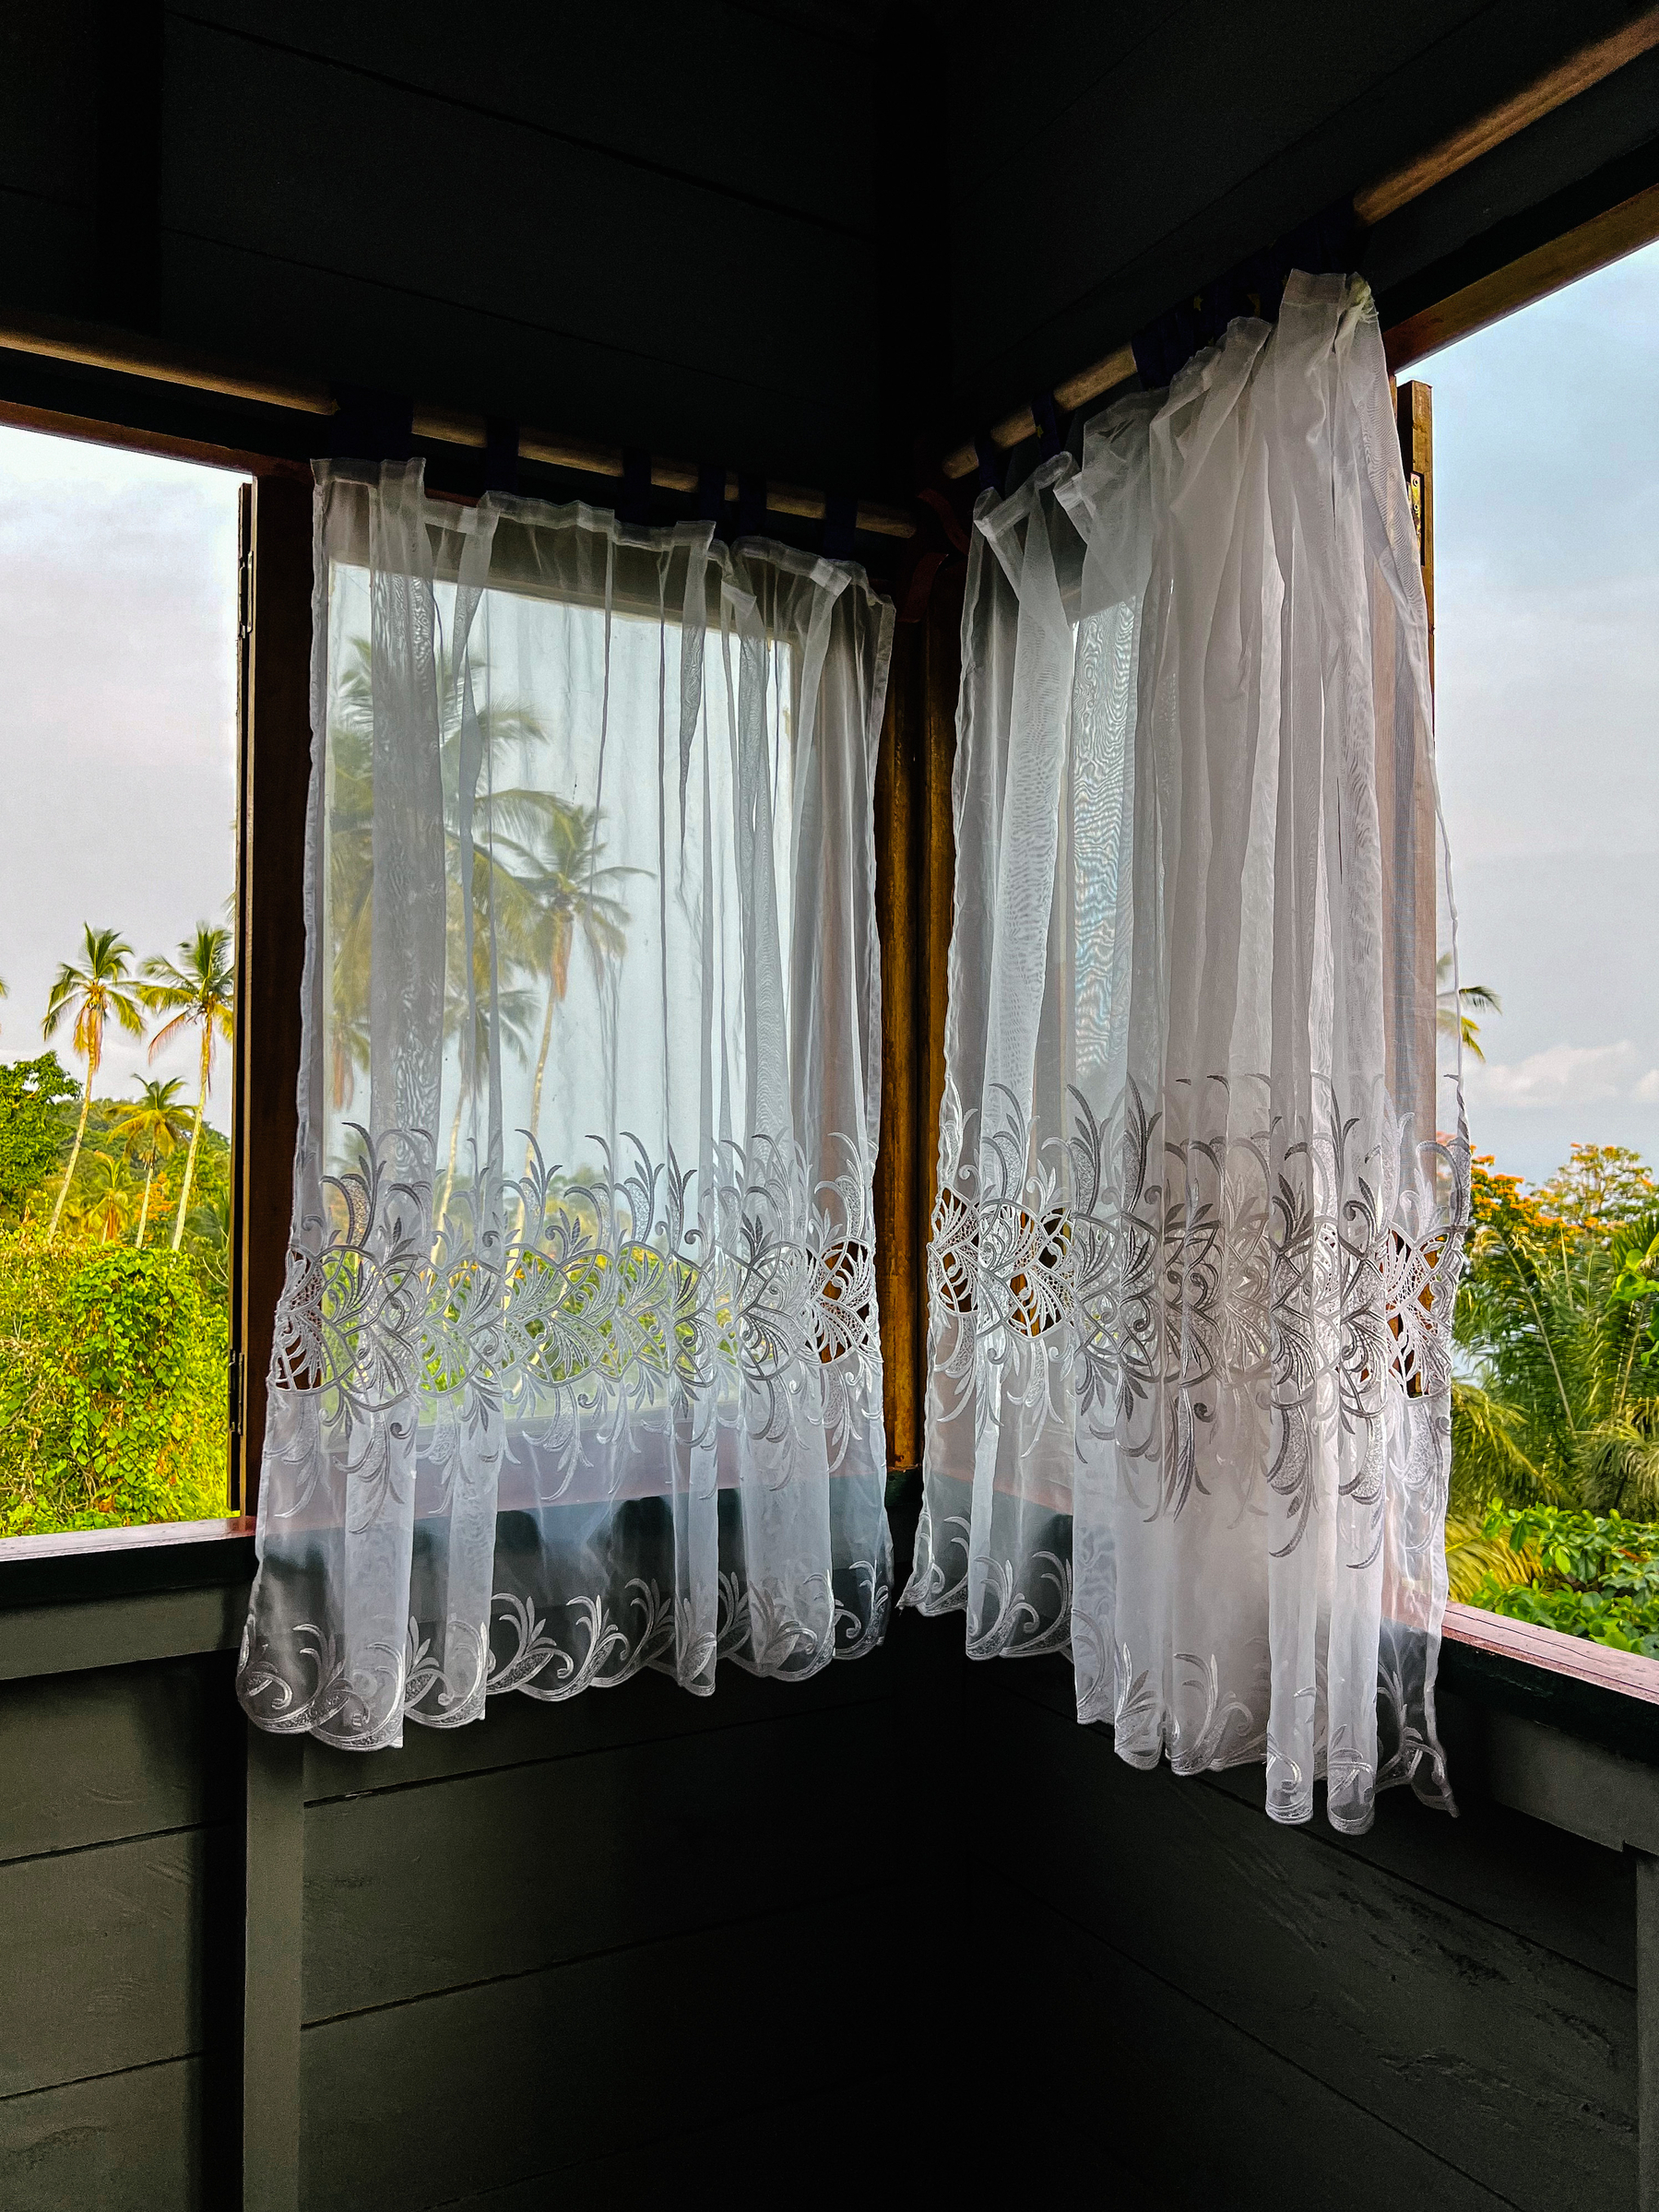 A curtain in a room. Palm trees visible on the outside. 